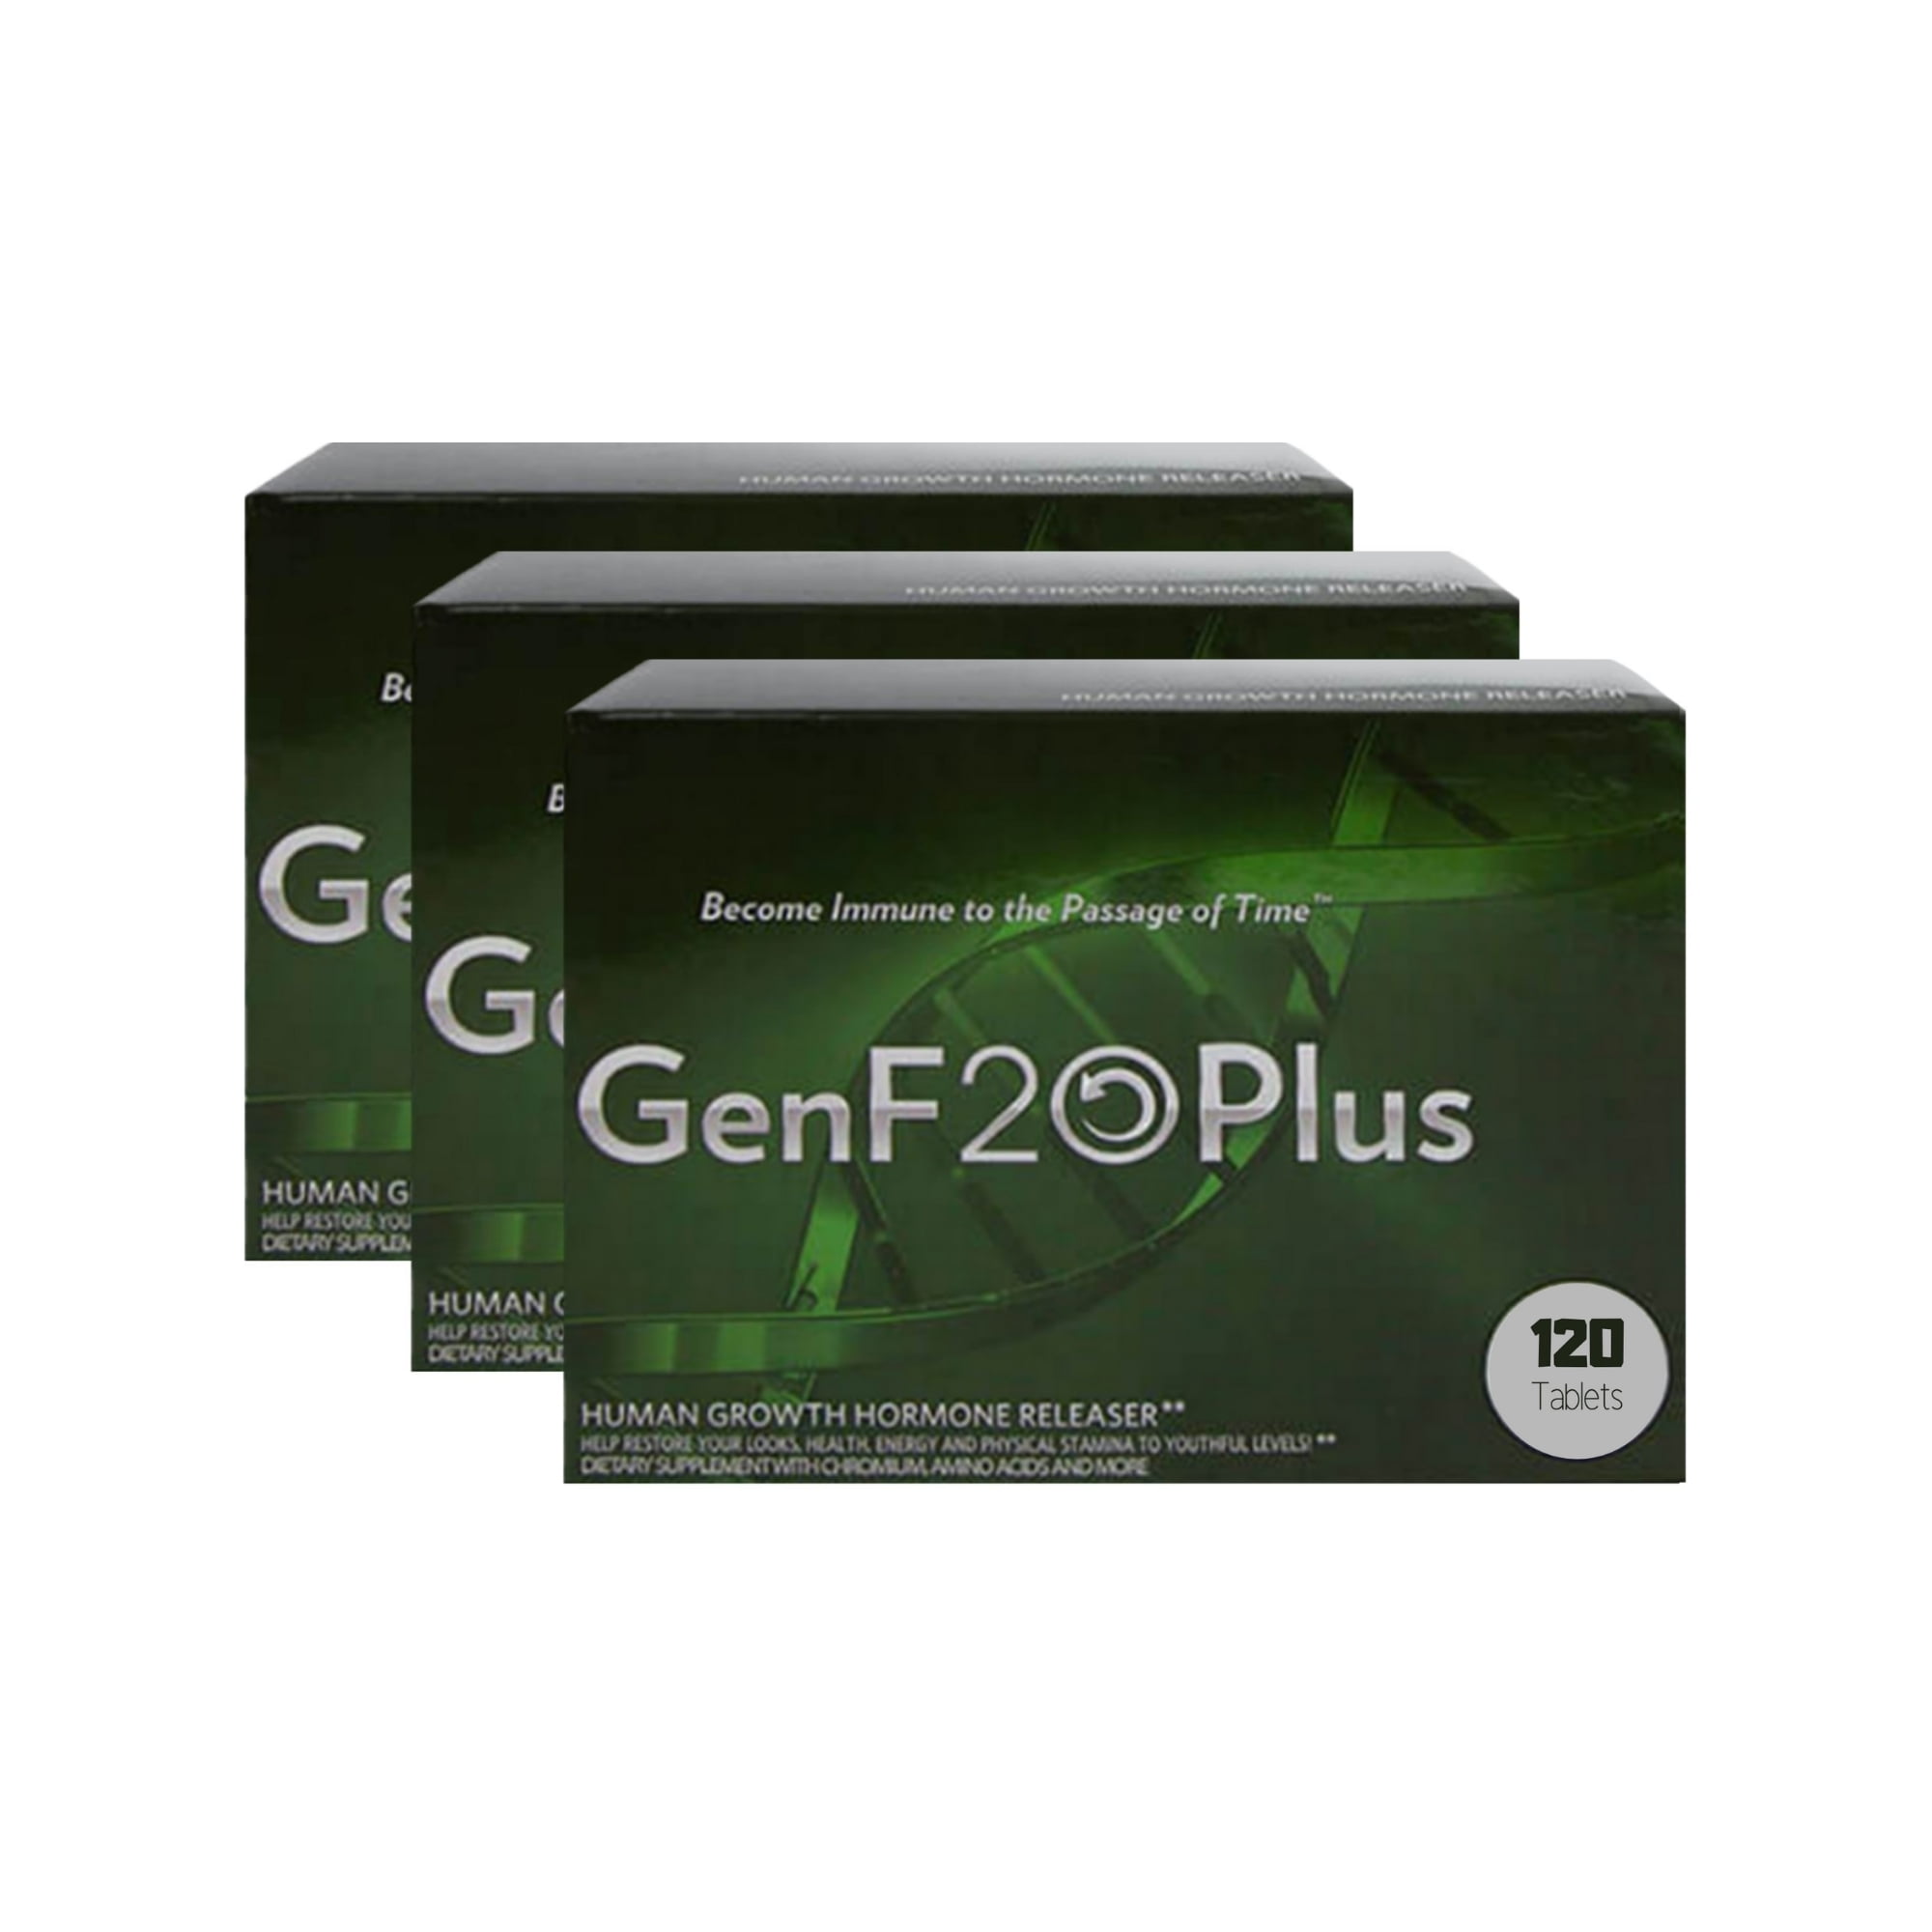 GenF20 Plus HGH, Human Growth Hormone Releaser, Albion Medical - Walmart.com